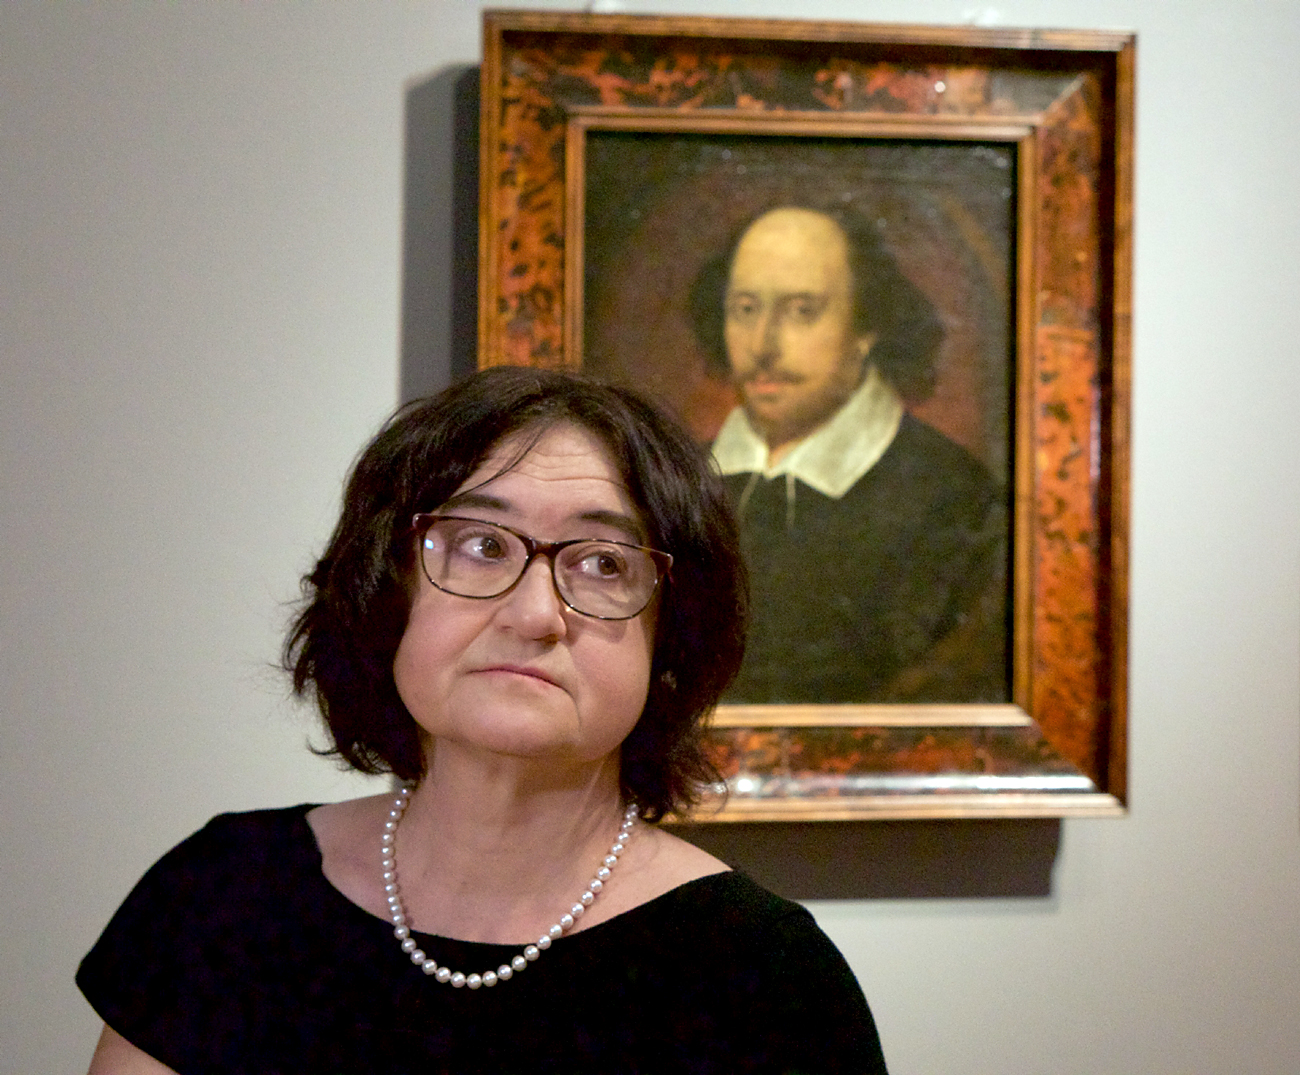 Director of the Tretyakov Gallery Zelfira Tregulova at the exhibition titled ‘From Elizabeth to Victoria. English portrait from the collection of the National Portrait Gallery, London’ in the Tretyakov Gallery.